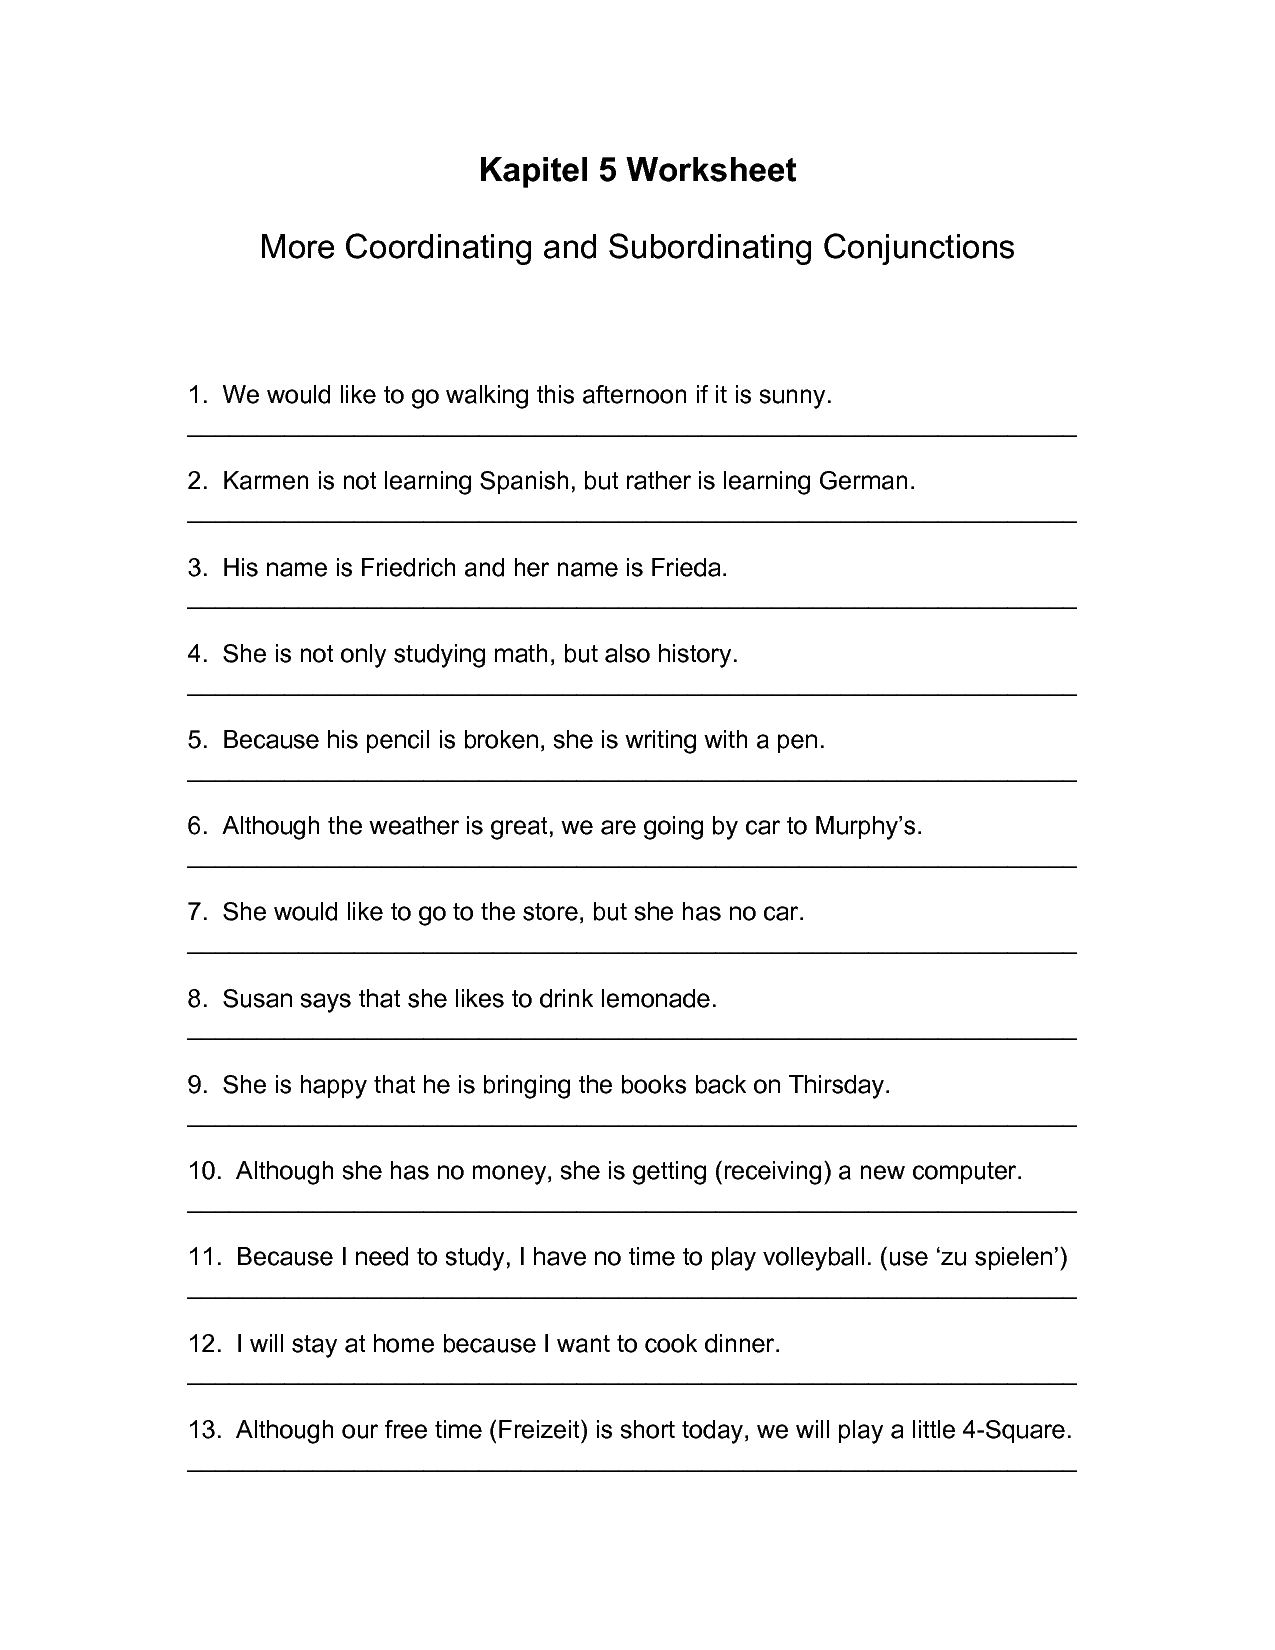 circle-the-subordinating-conjunction-in-each-sentence-worksheet-turtle-diary